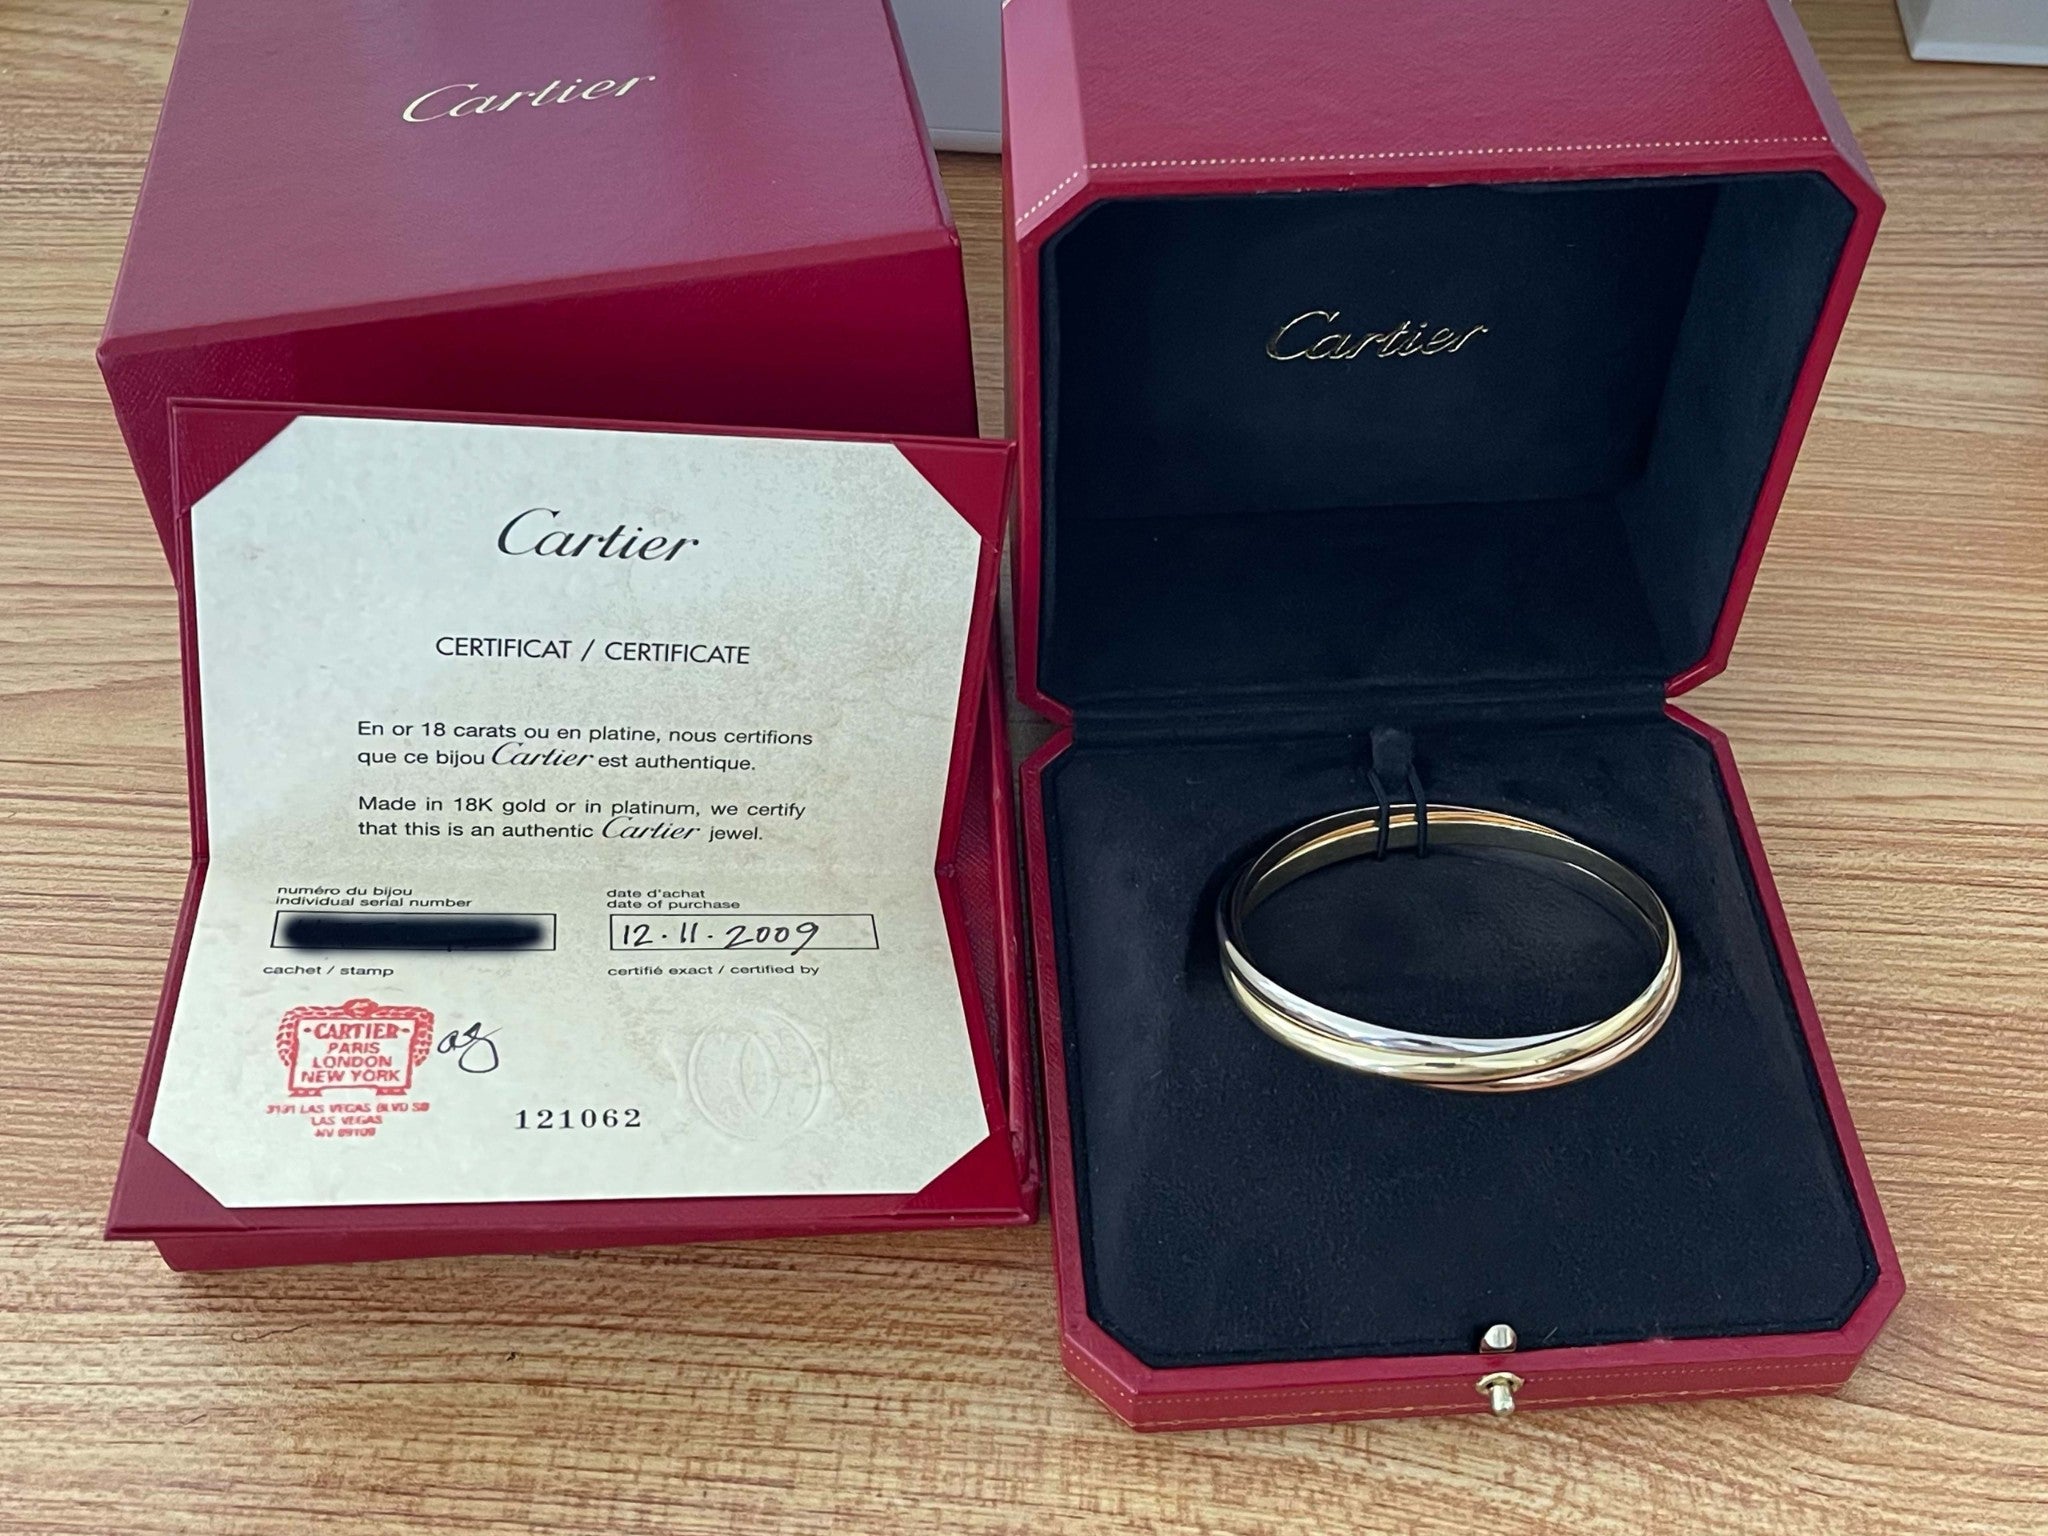 MY FIRST CARTIER PURCHASE | TRINITY CORD BRACELET UNBOXING - YouTube